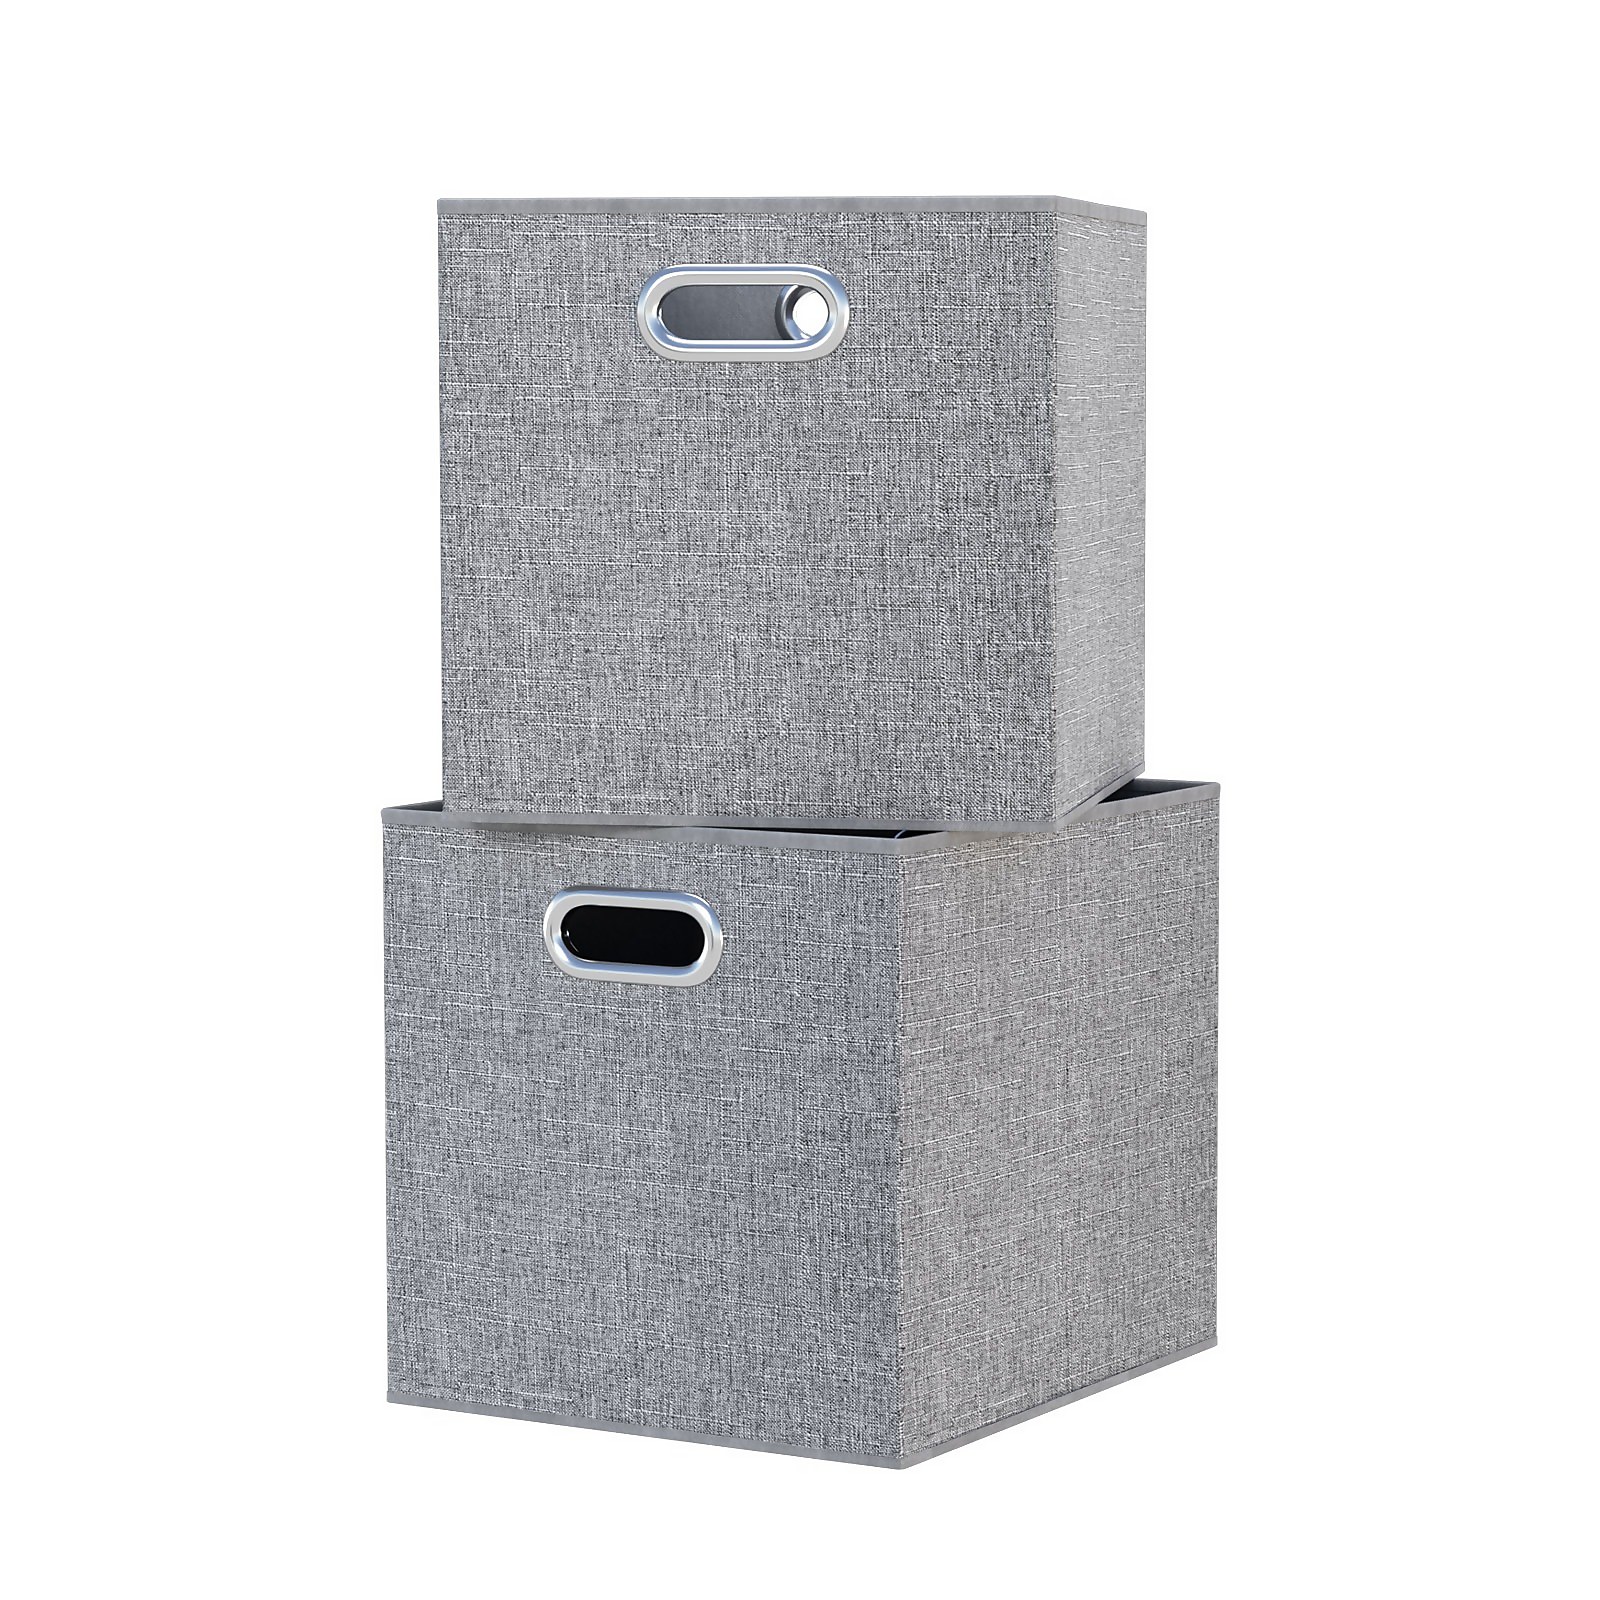 Photo of Clever Cube Fabric Insert - Set Of 2 - Taupe